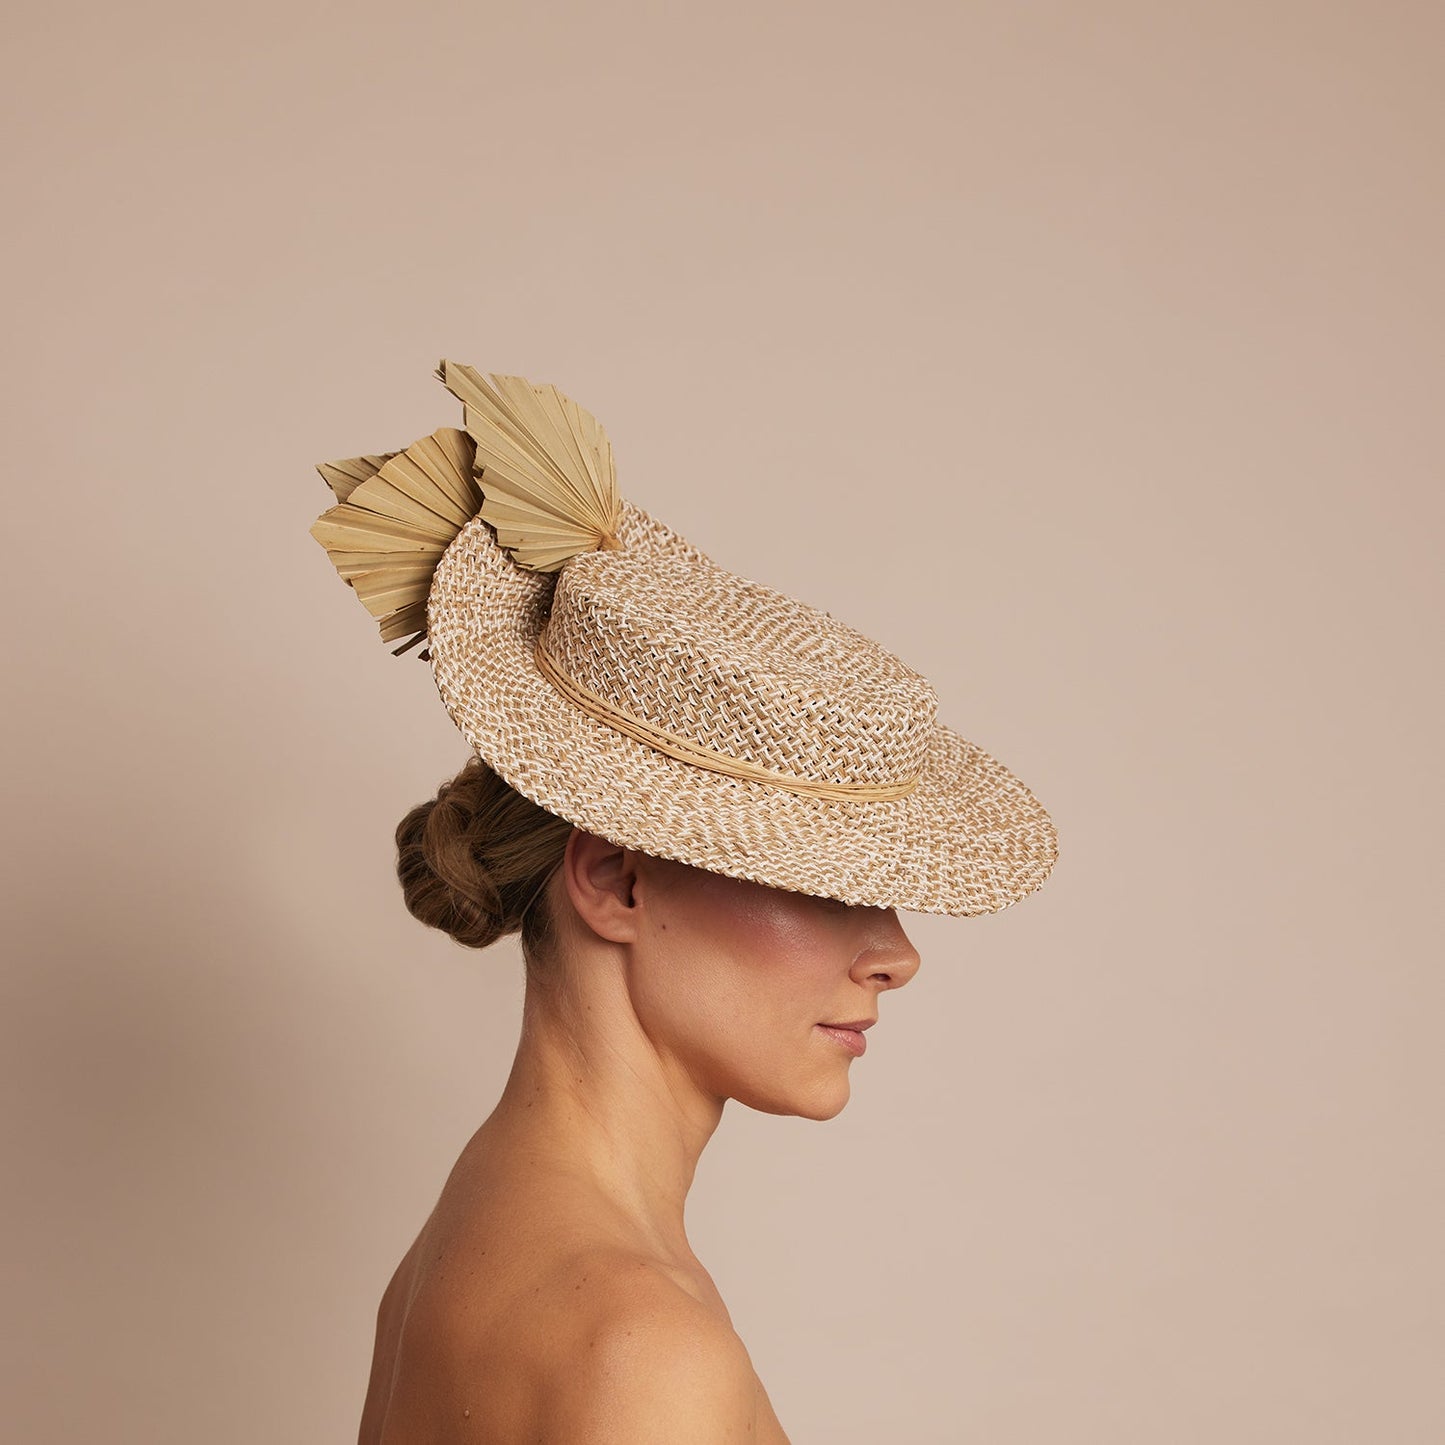 Melbourne Cup Millinery